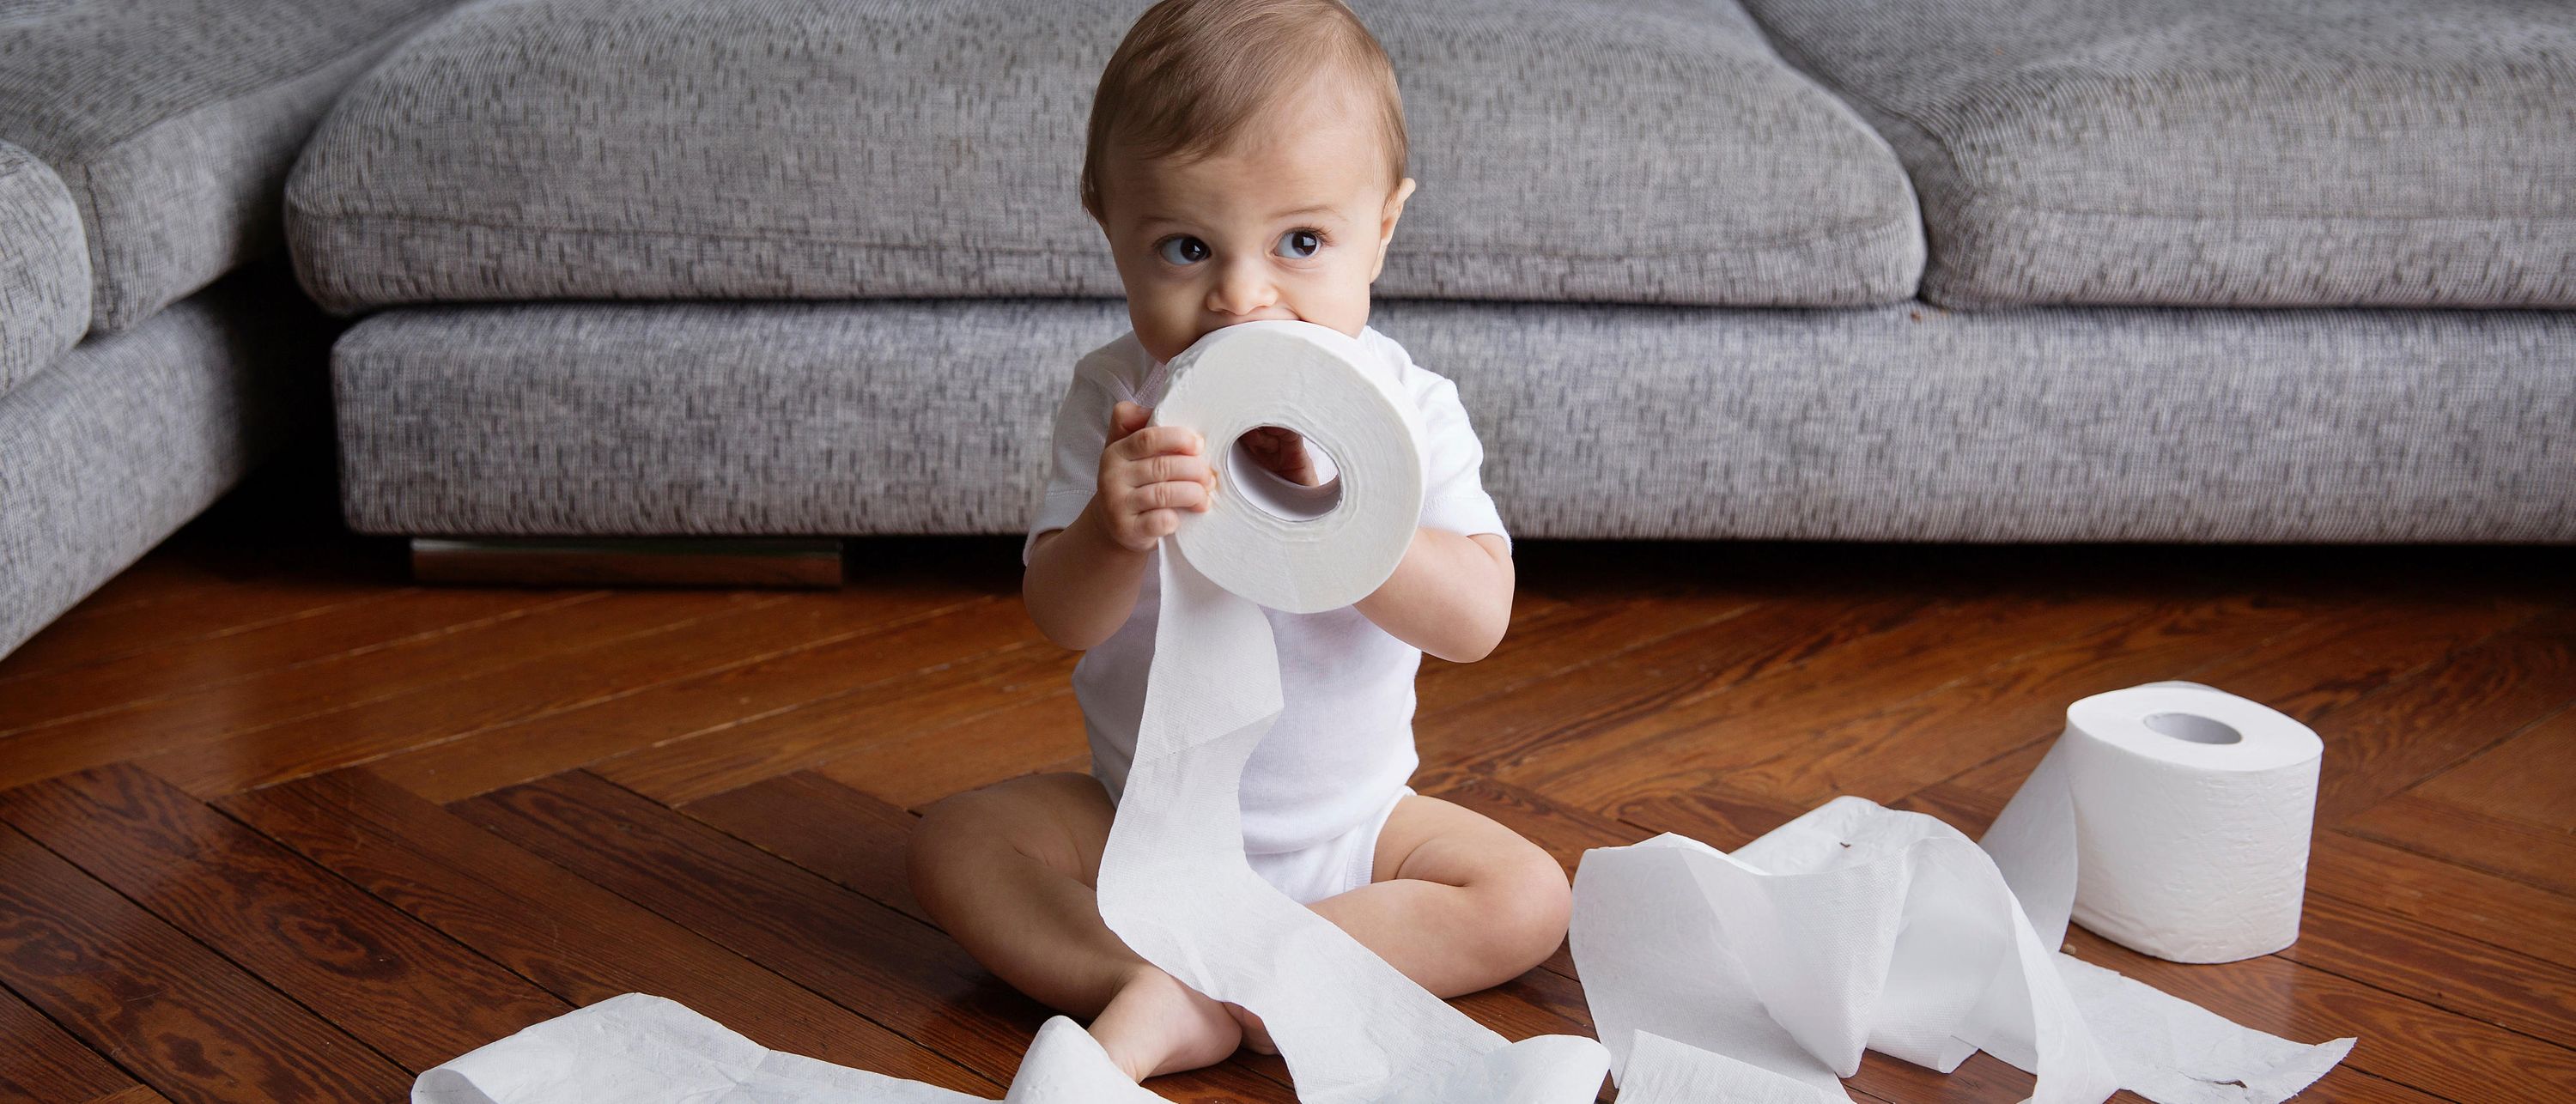 baby sitting on floor with toilett paper in front of sofa